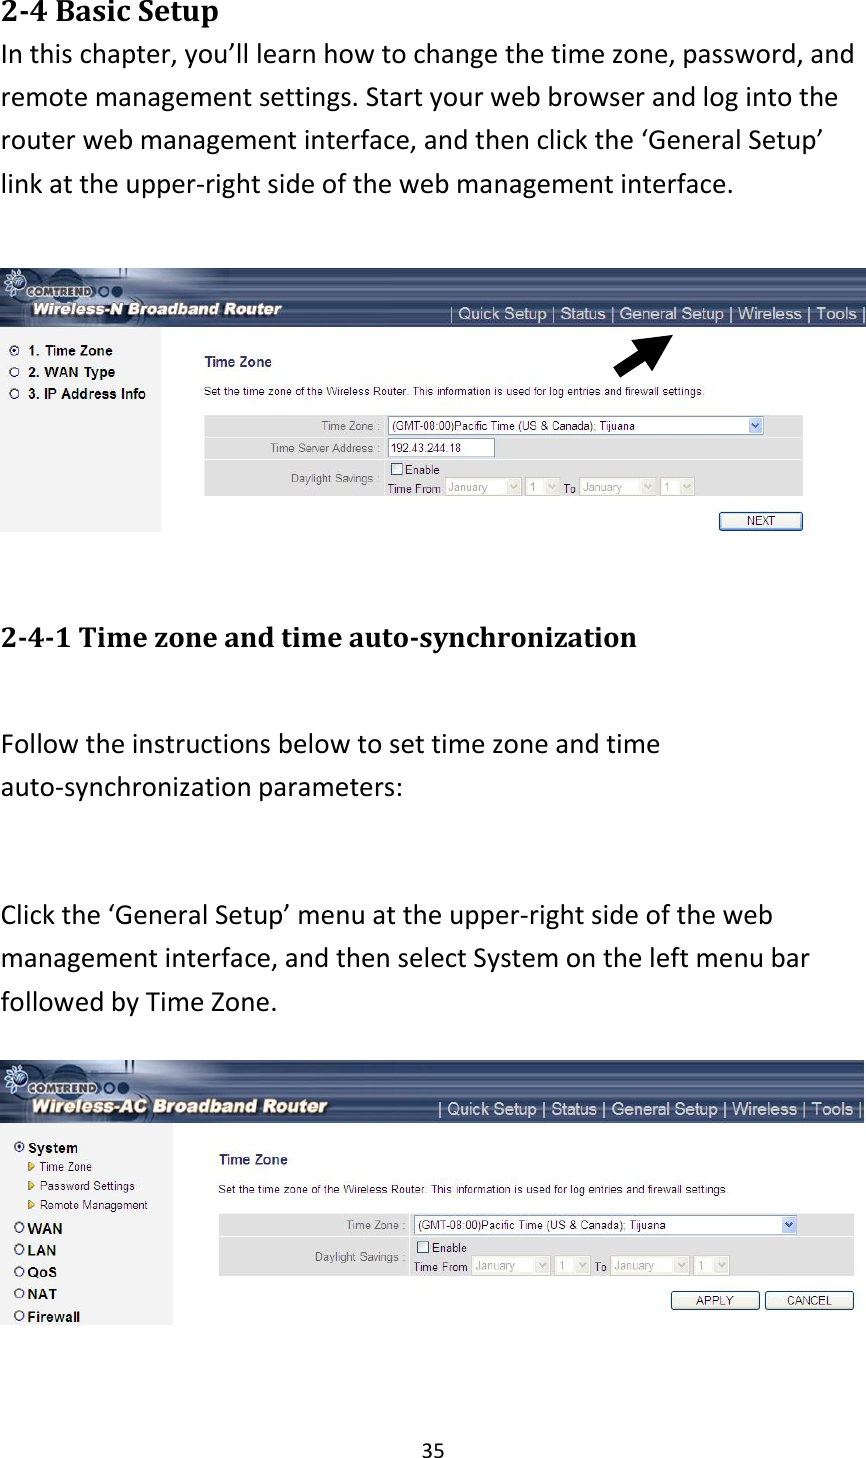 35 2-4 Basic Setup In this chapter, you’ll learn how to change the time zone, password, and remote management settings. Start your web browser and log into the router web management interface, and then click the ‘General Setup’ link at the upper-right side of the web management interface.    2-4-1 Time zone and time auto-synchronization  Follow the instructions below to set time zone and time auto-synchronization parameters:  Click the ‘General Setup’ menu at the upper-right side of the web management interface, and then select System on the left menu bar followed by Time Zone.   